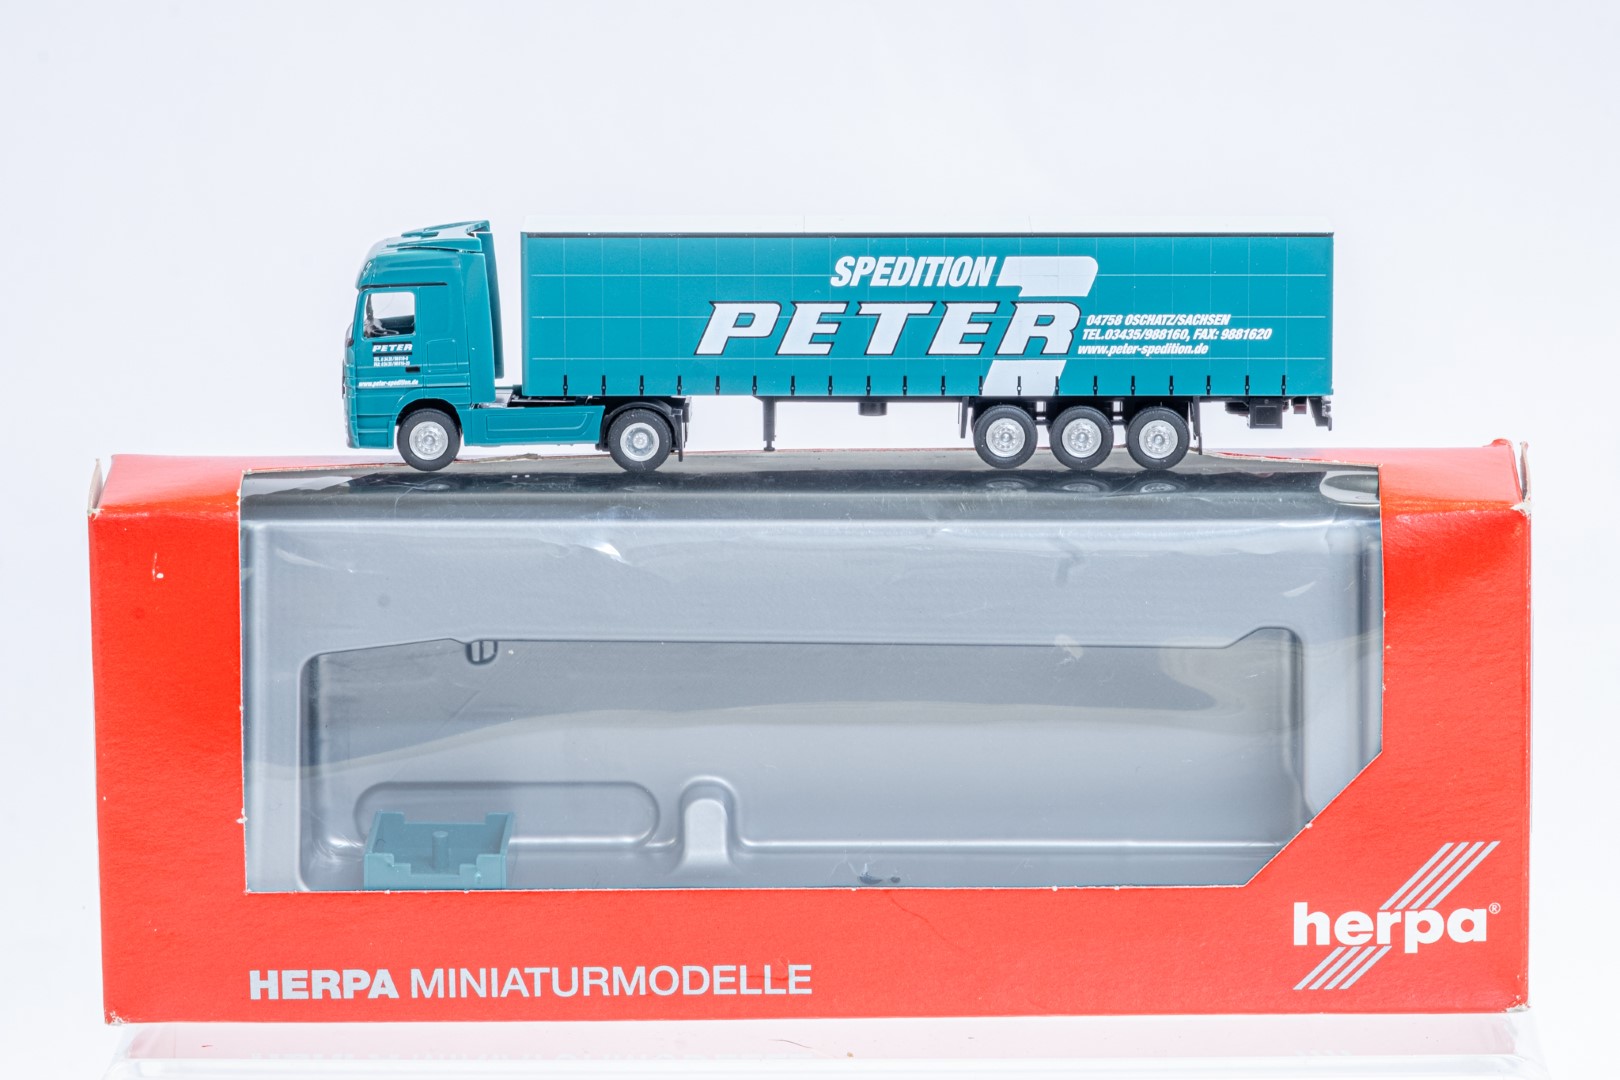 Herpa Merc Actros Box Trailer - Peter Spedition - Image 2 of 8